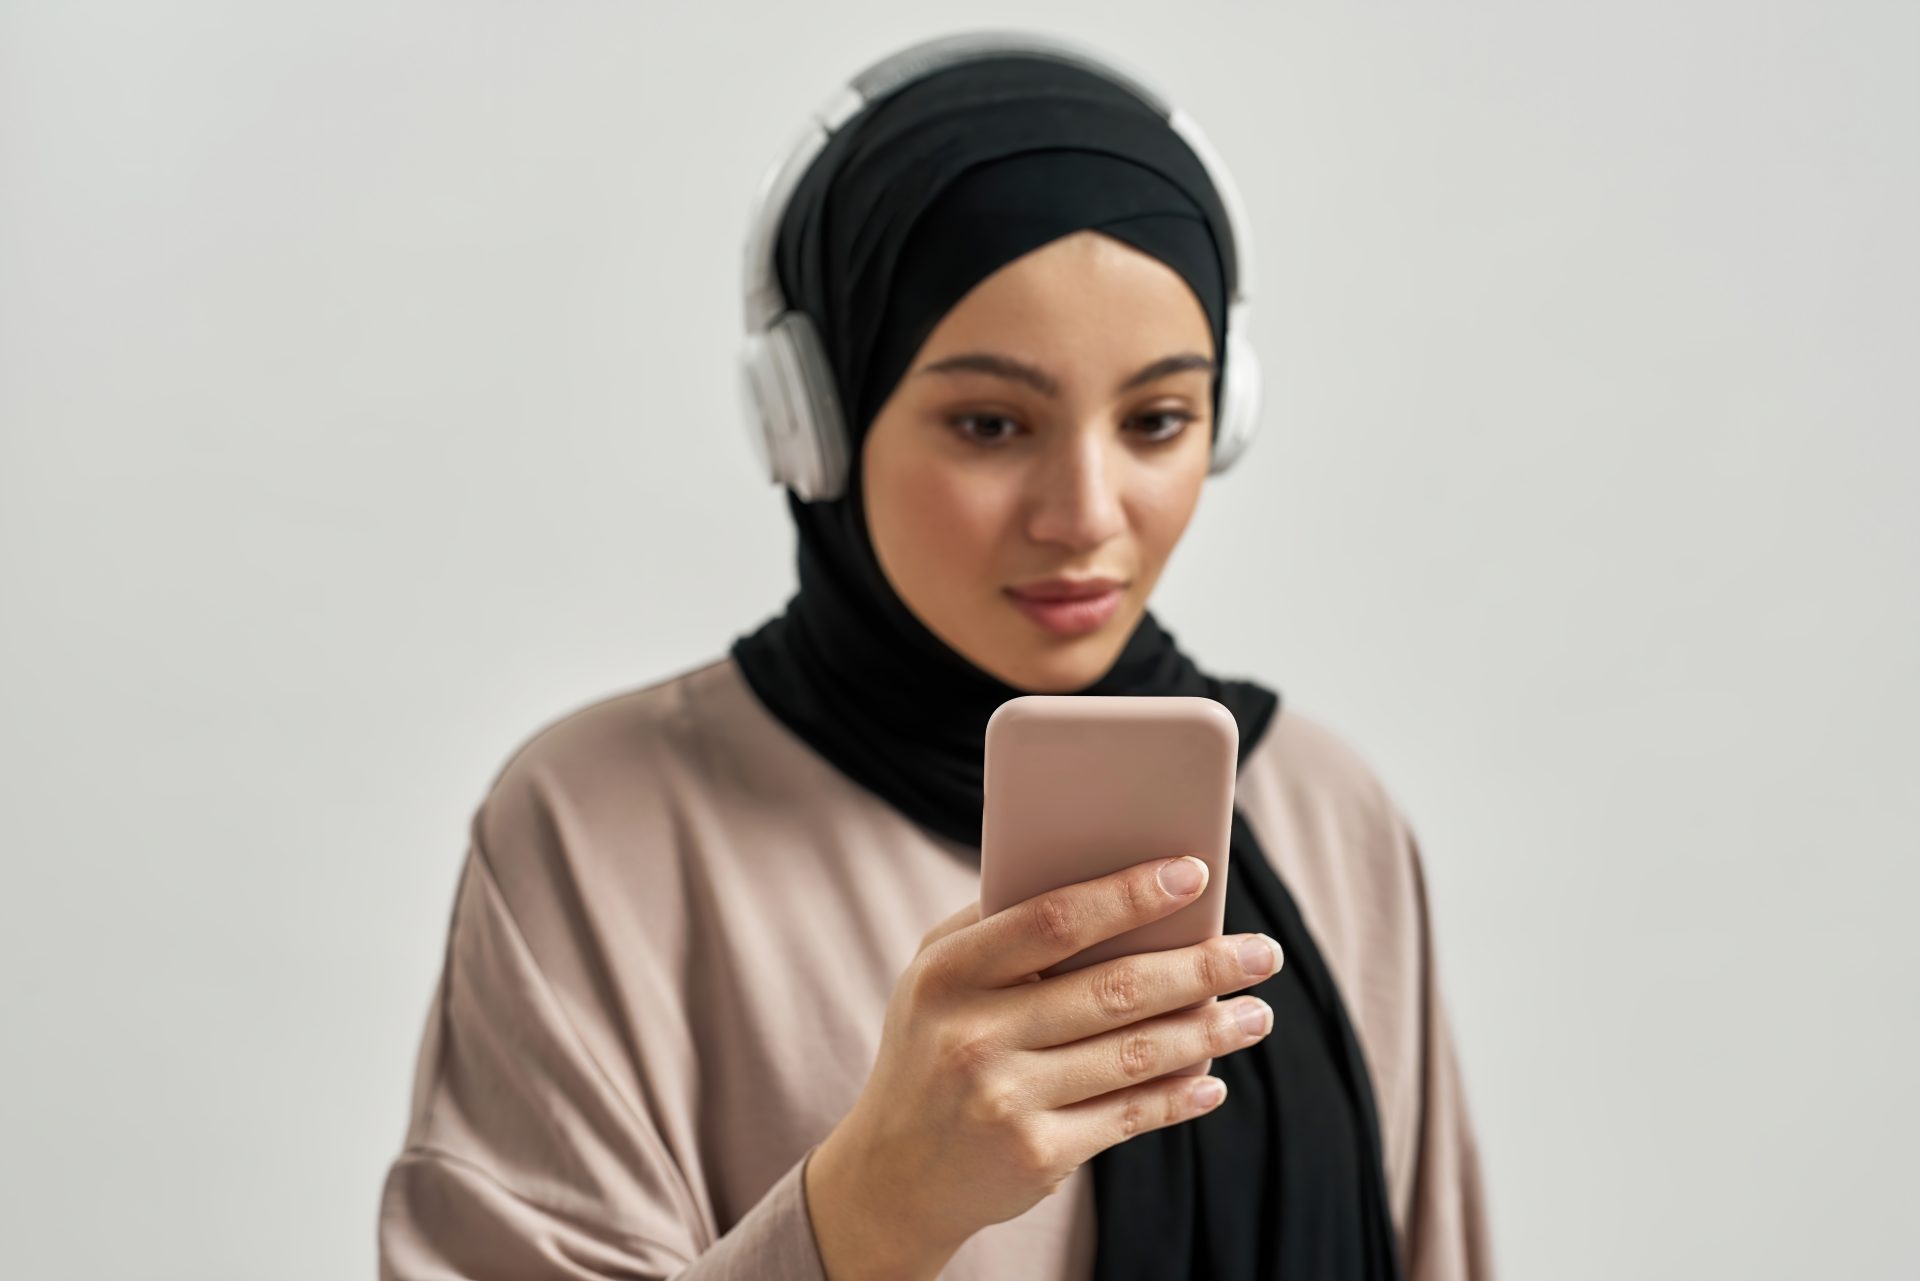 Listening to a podcast during ramadan